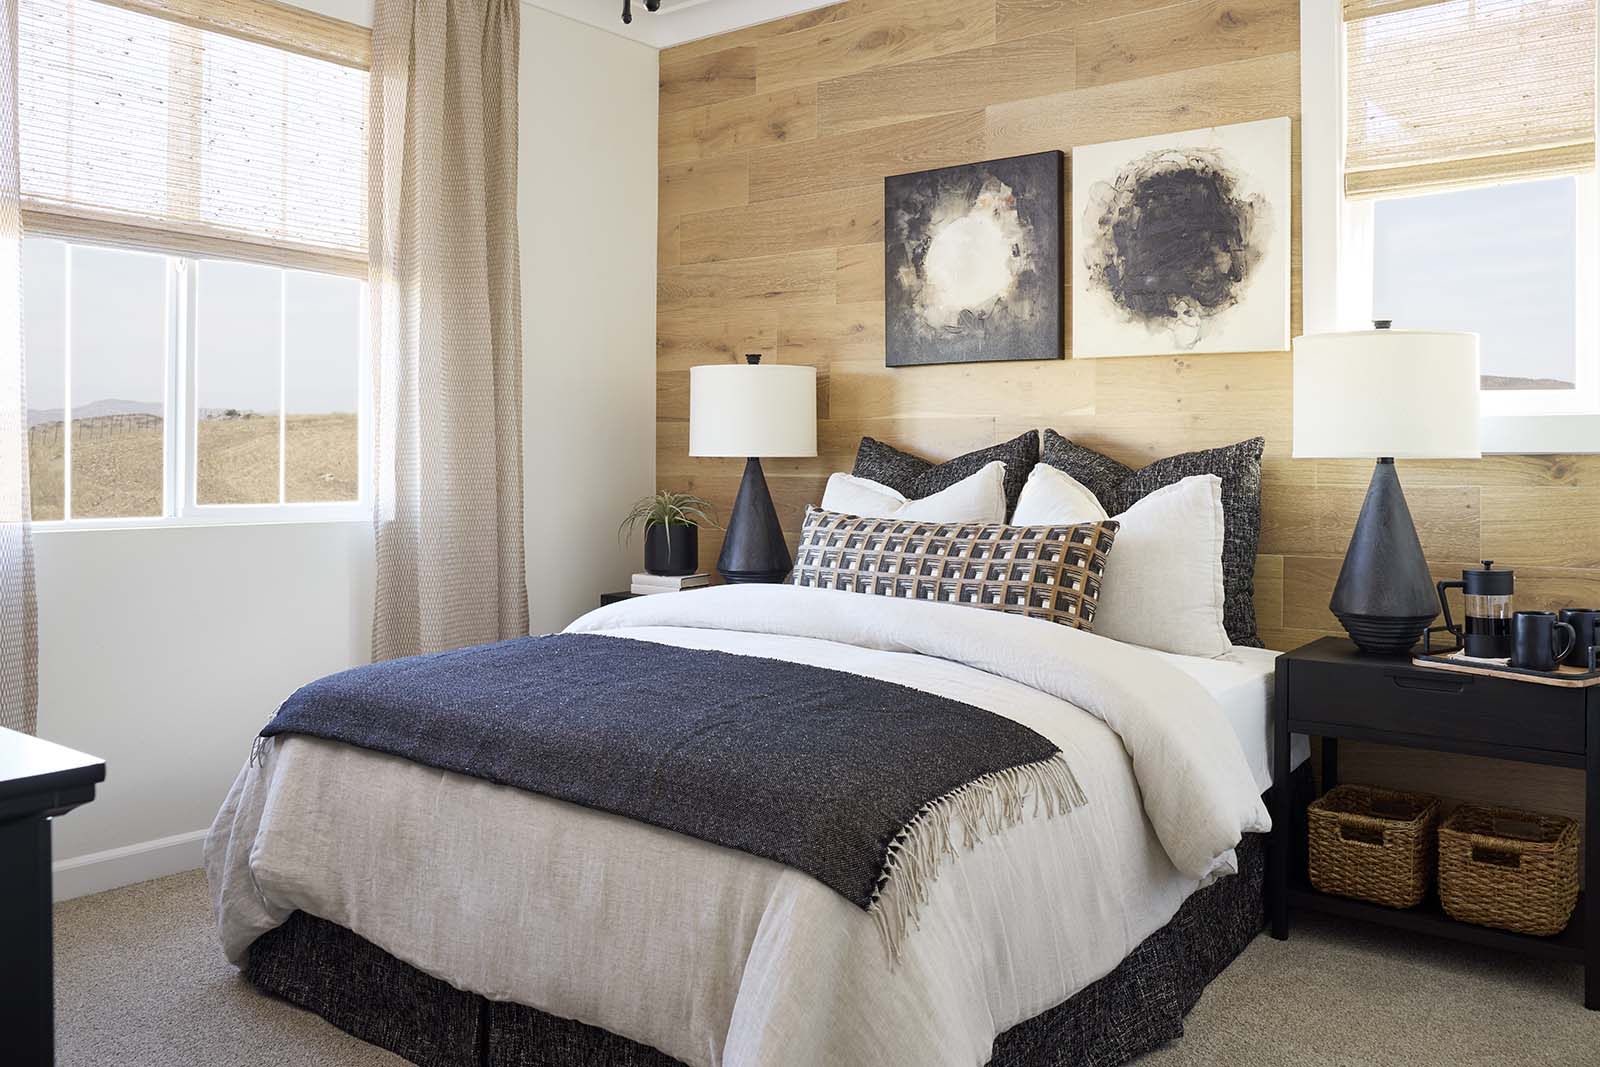 Bedroom Two - Plan 2 - Medley at Sommers Bend